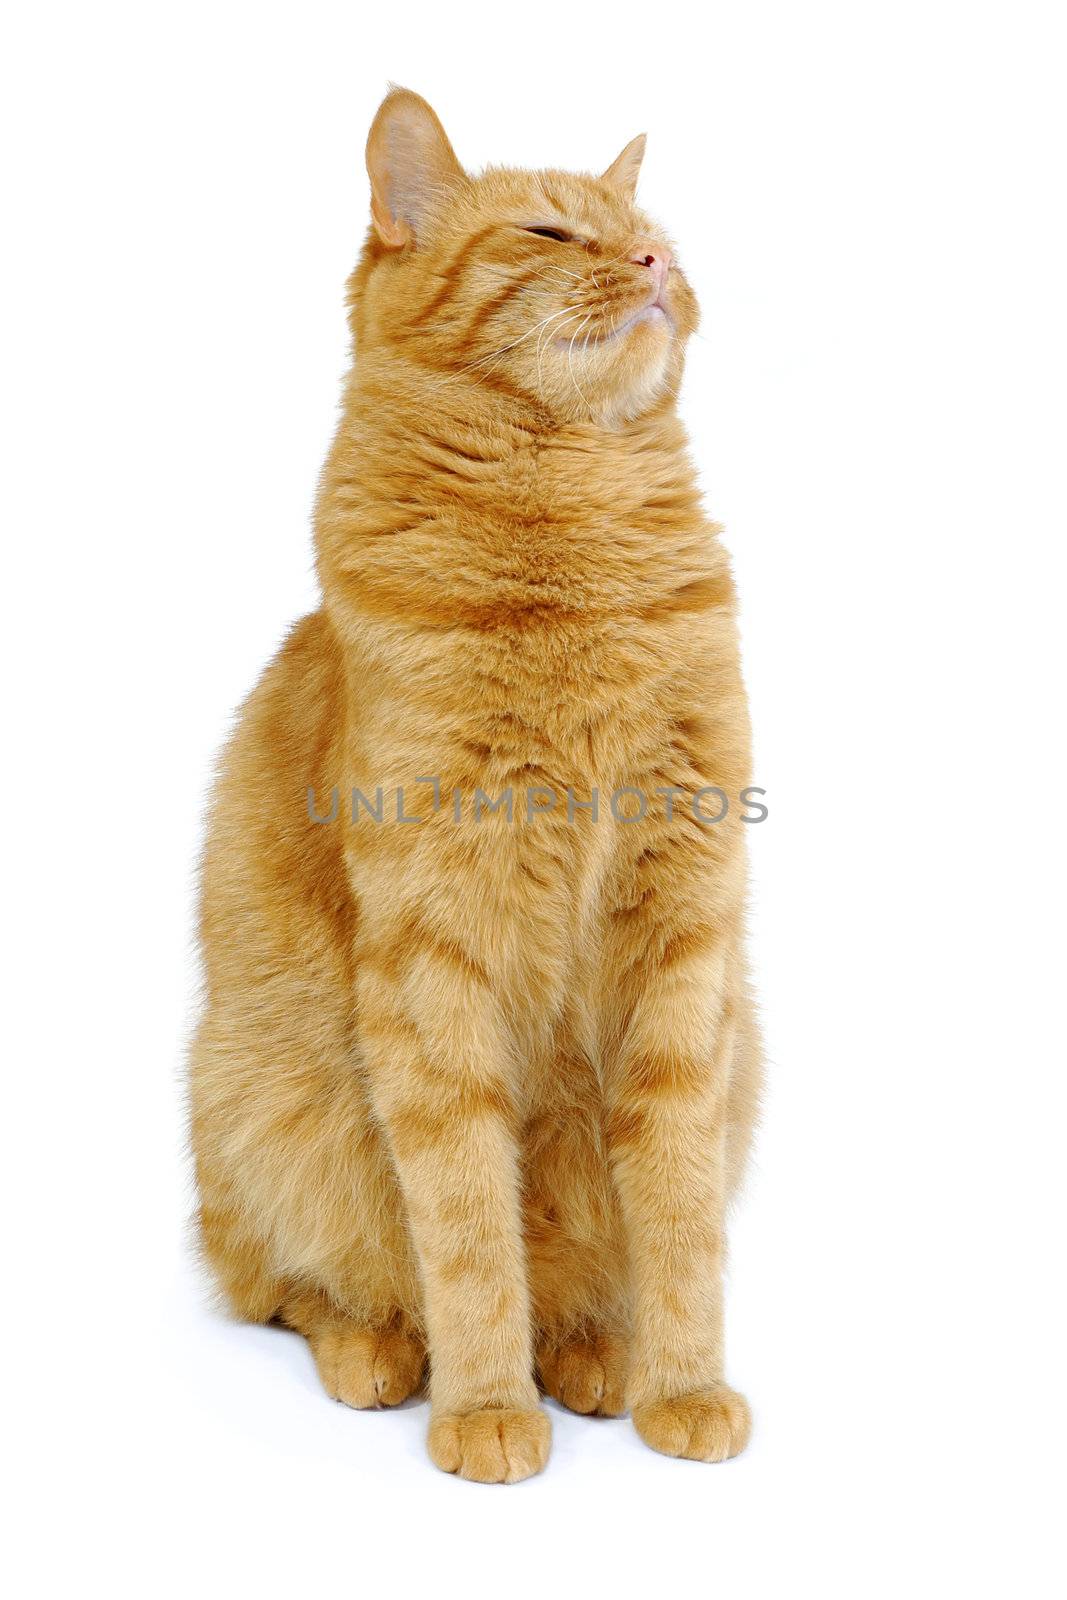 Cat on a clean white background